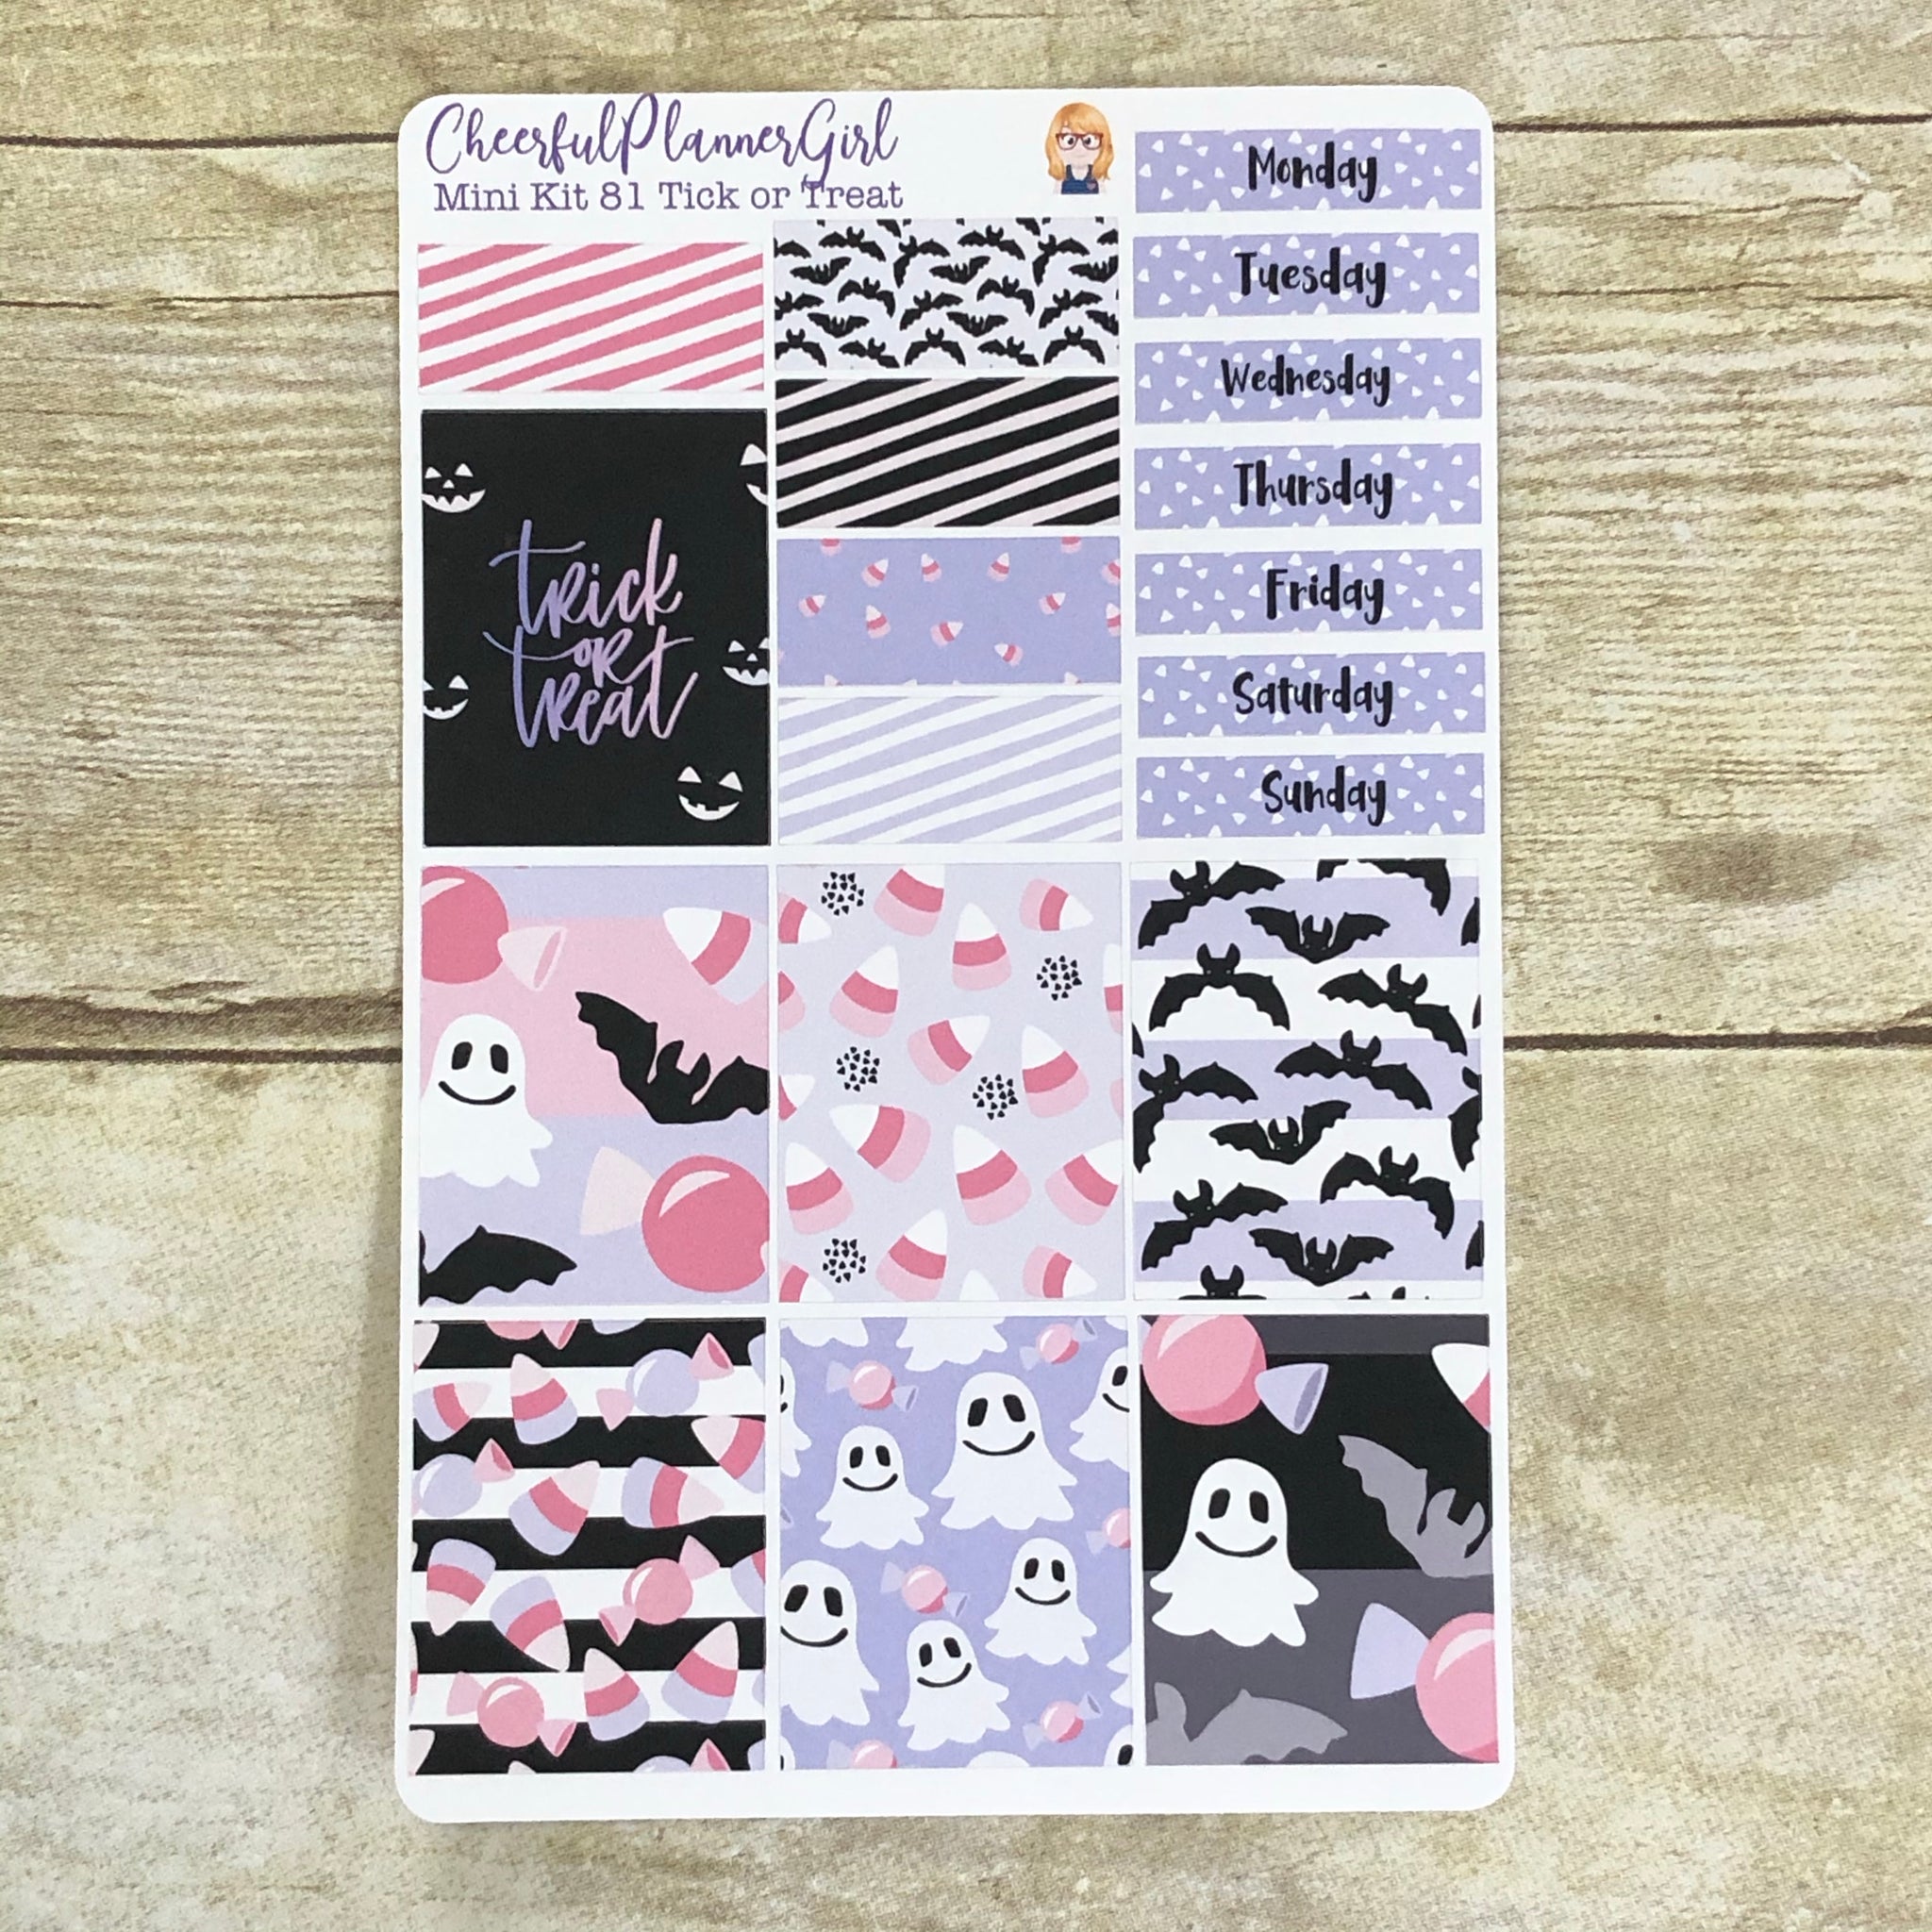 Trick or Treat Mini Kit Weekly Layout Planner Stickers